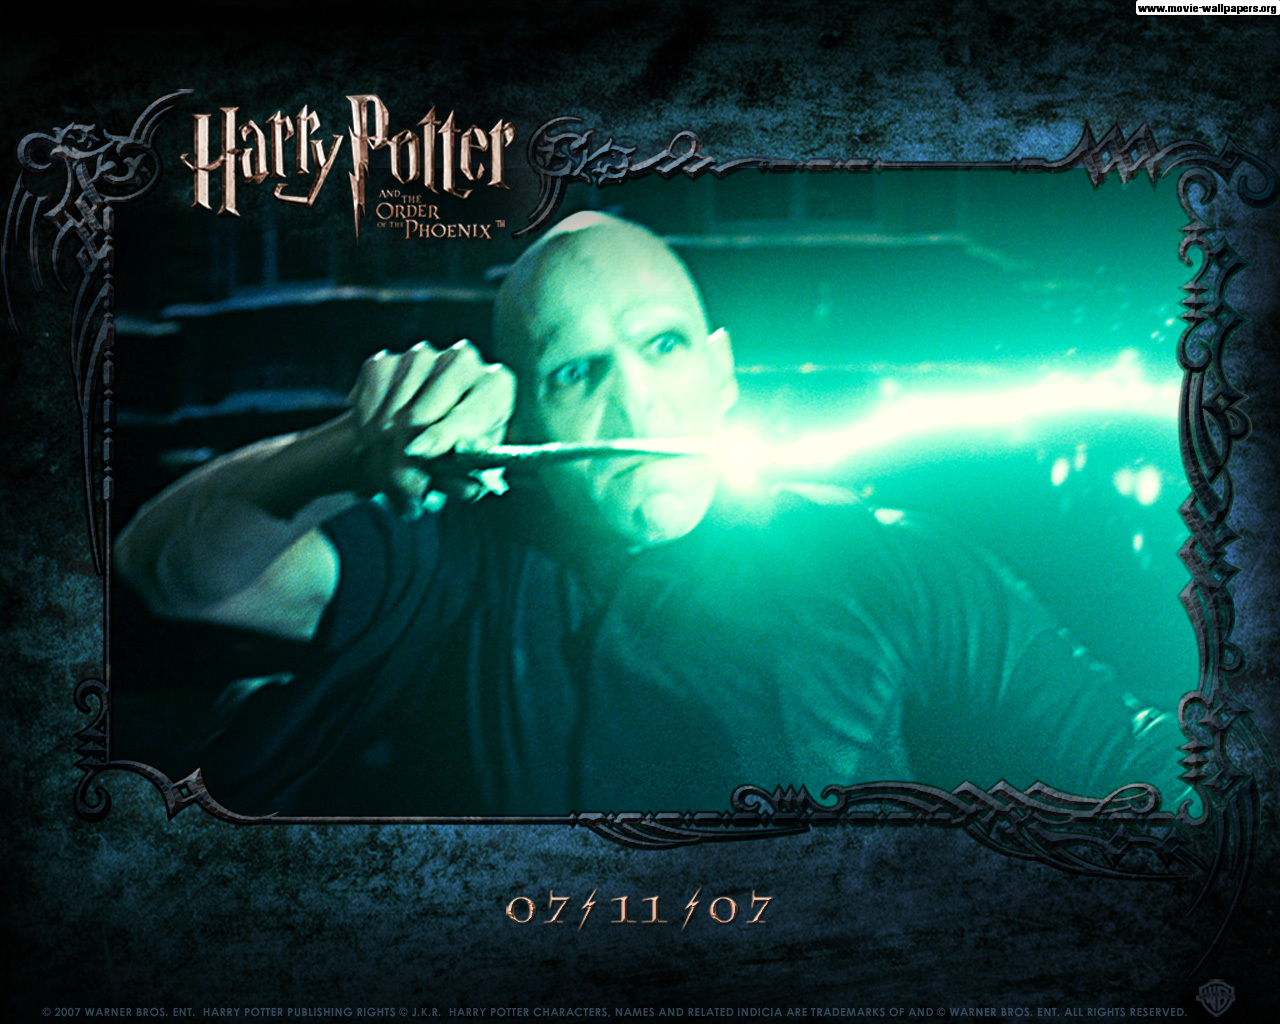 Harry Potter and the Order of the Phoenix - Movies Maniac1280 x 1024